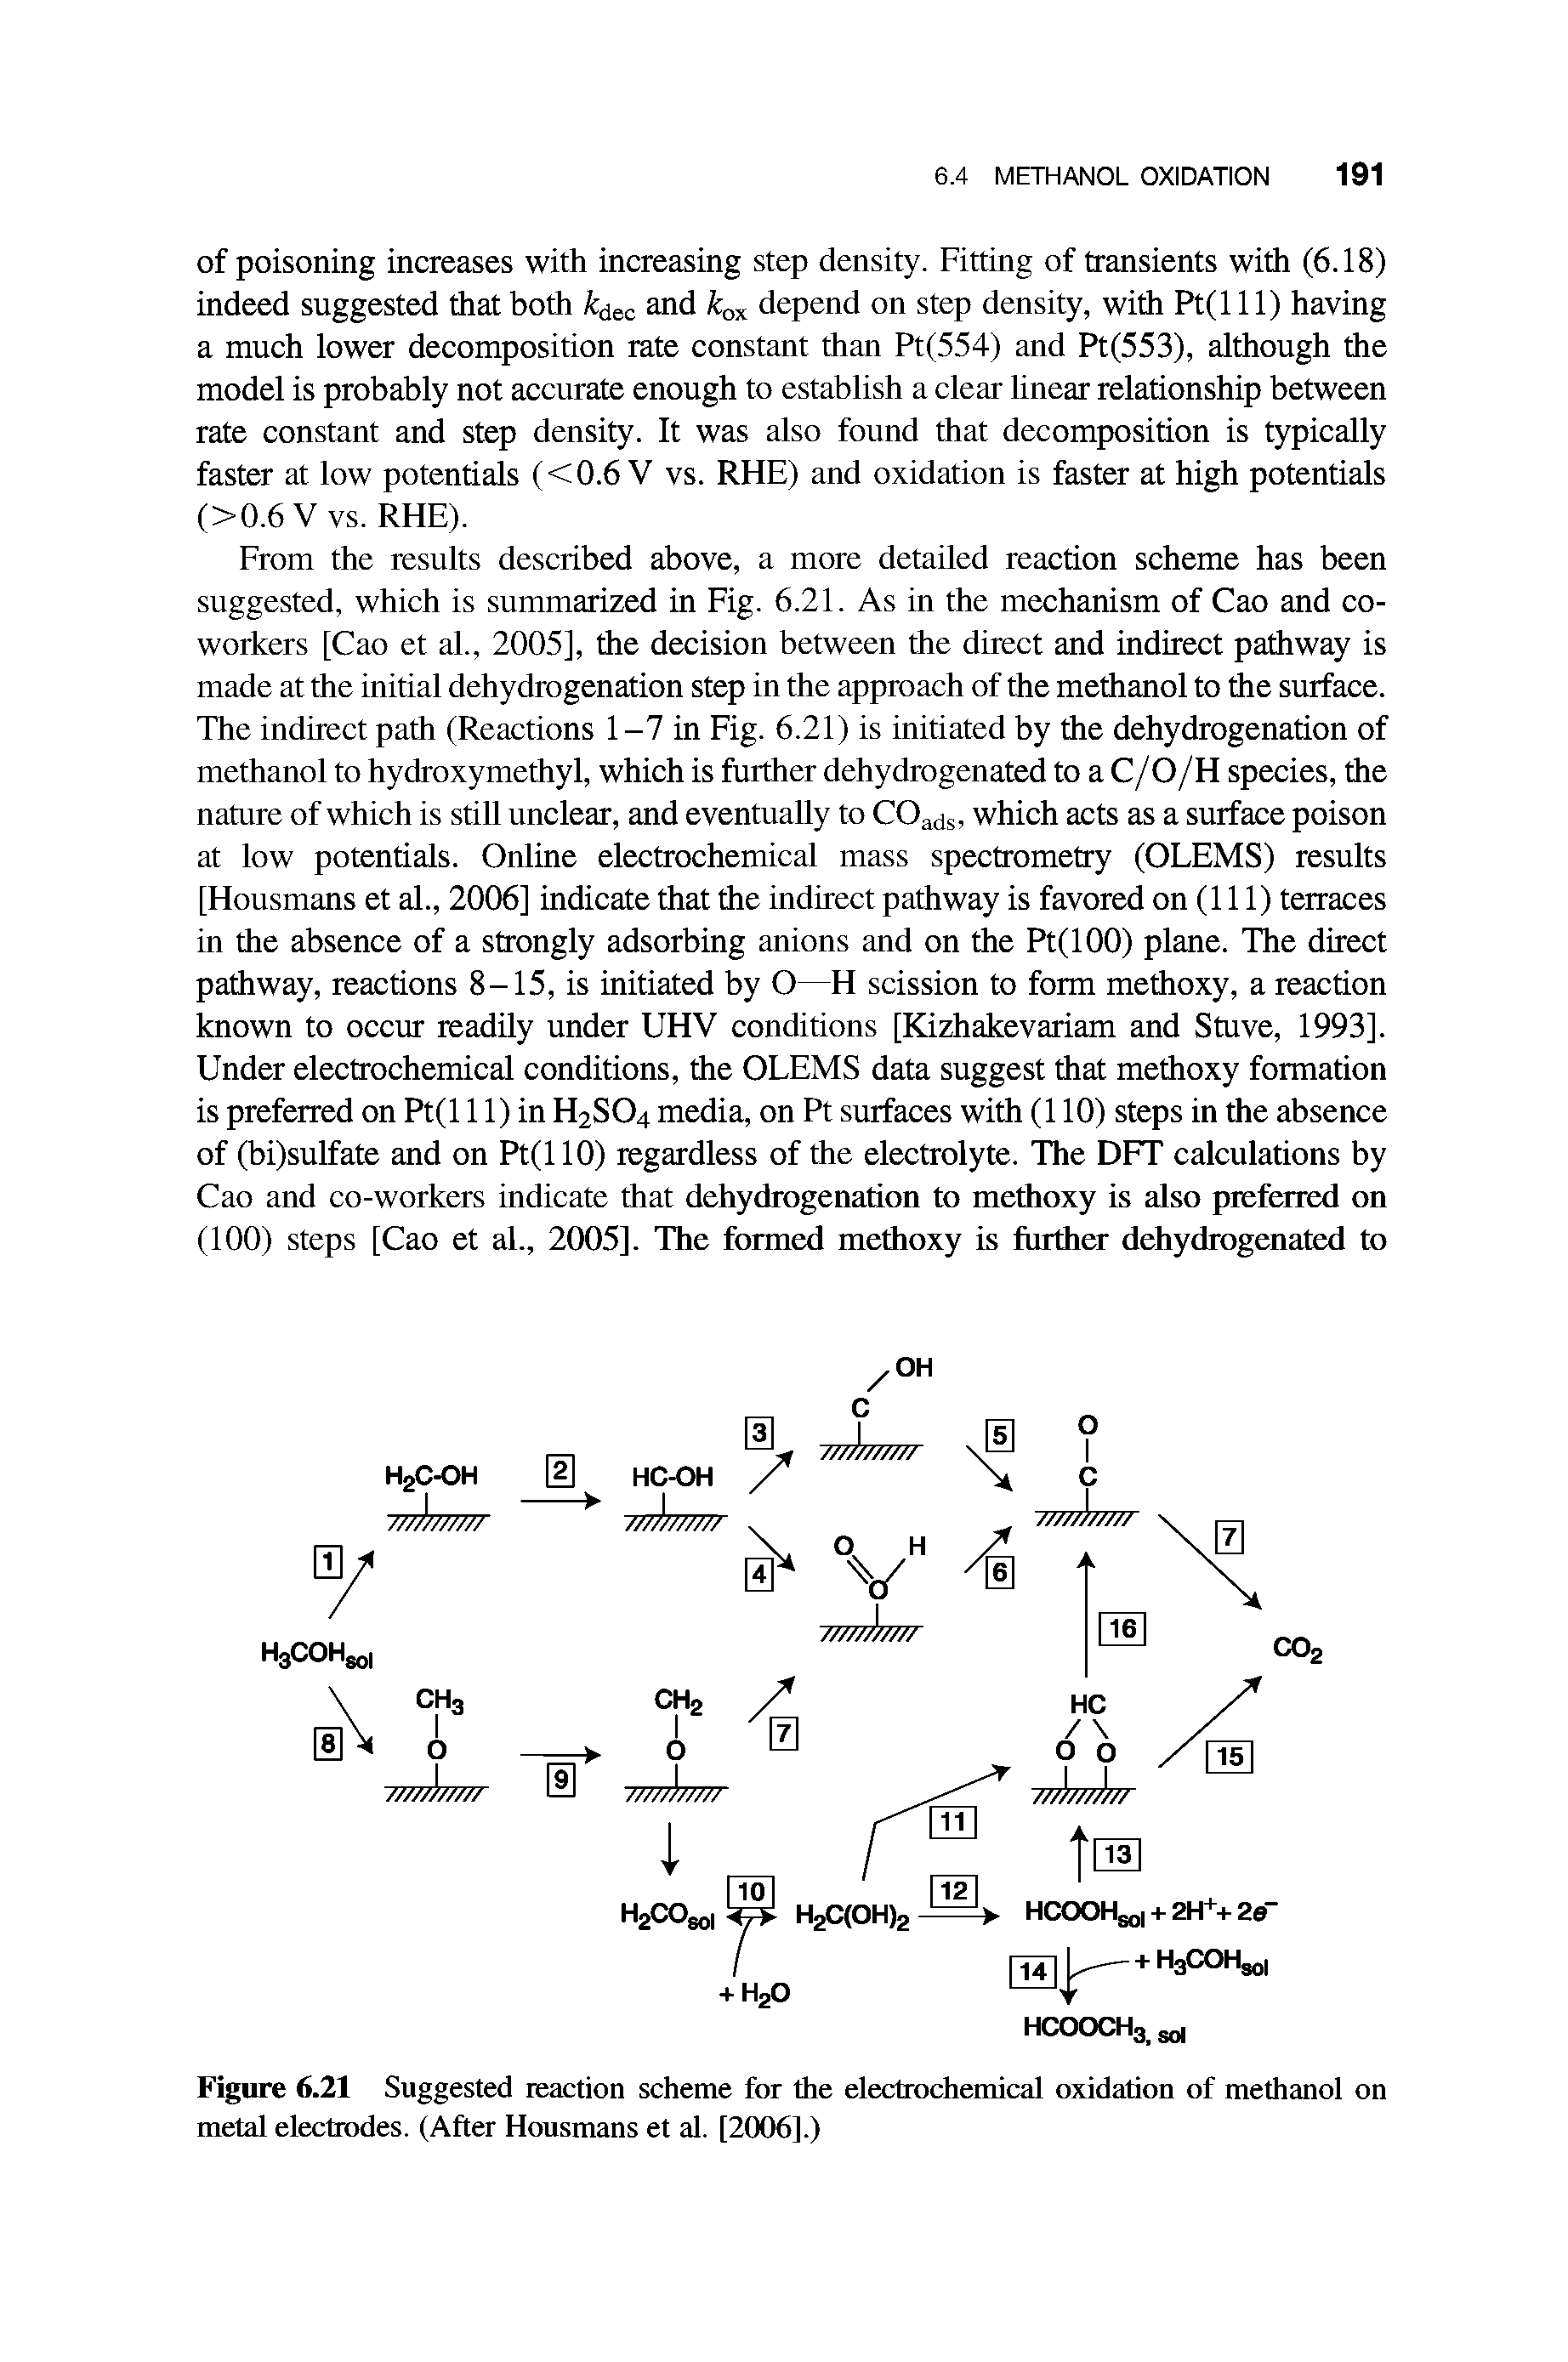 Figure 6.21 Suggested reaction scheme for the electrochemical oxidation of methanol on metal electrodes. (After Housmans et al. [2006].)...